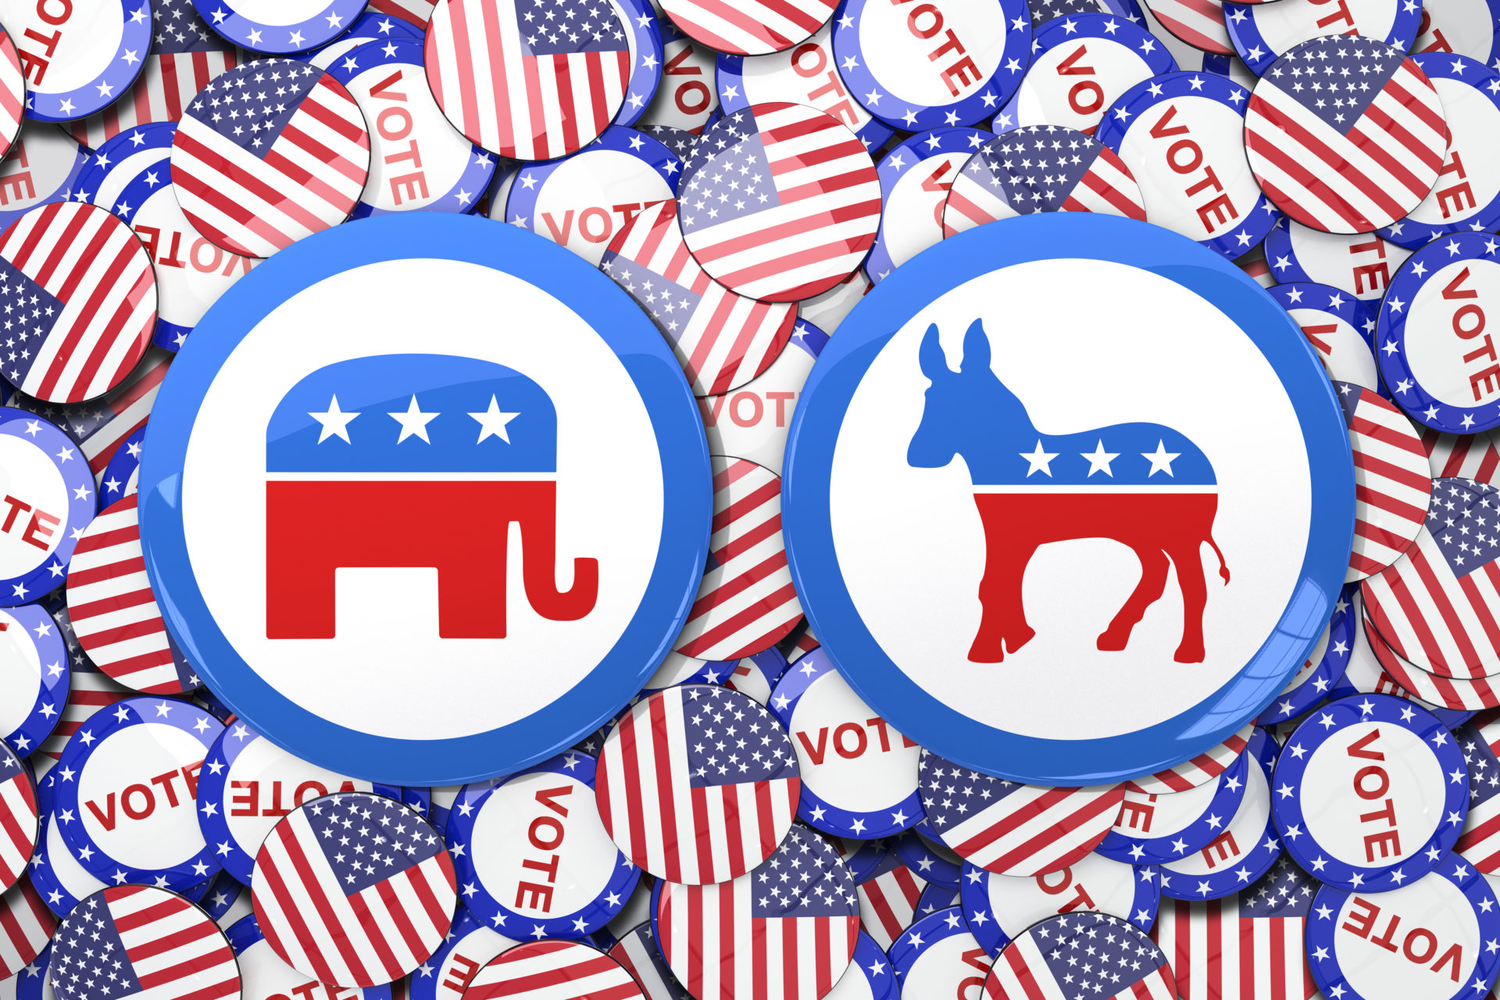 The Democratic and Republican Parties in the United States